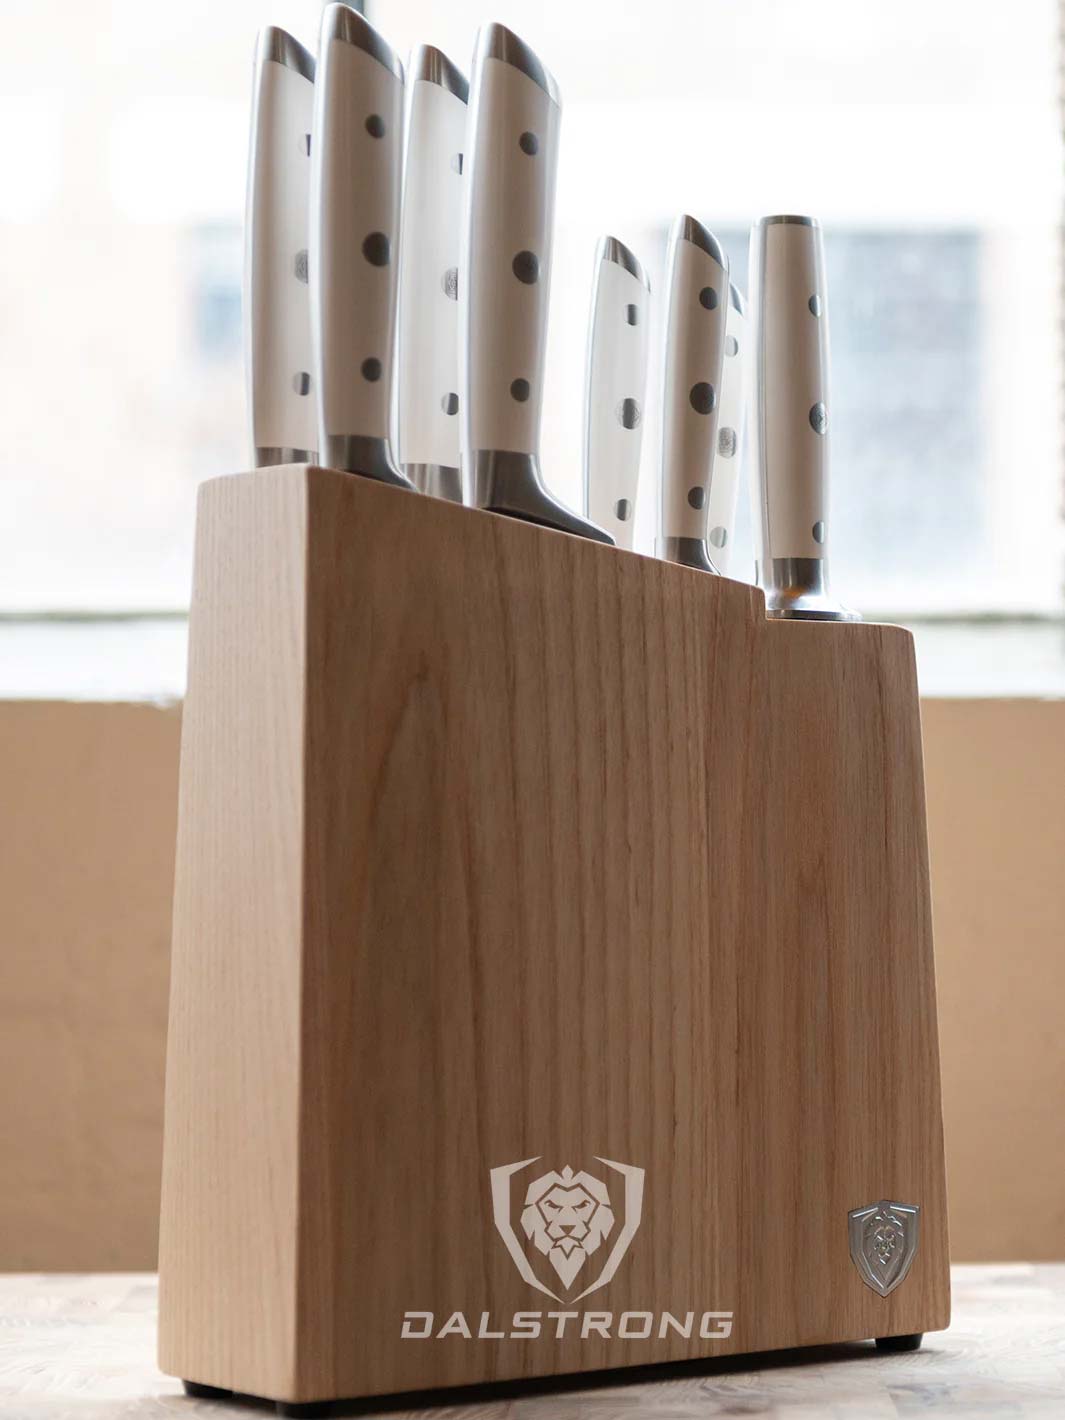 Dalstrong gladiator series 8 piece knife set with white handles inside it's block on a table.